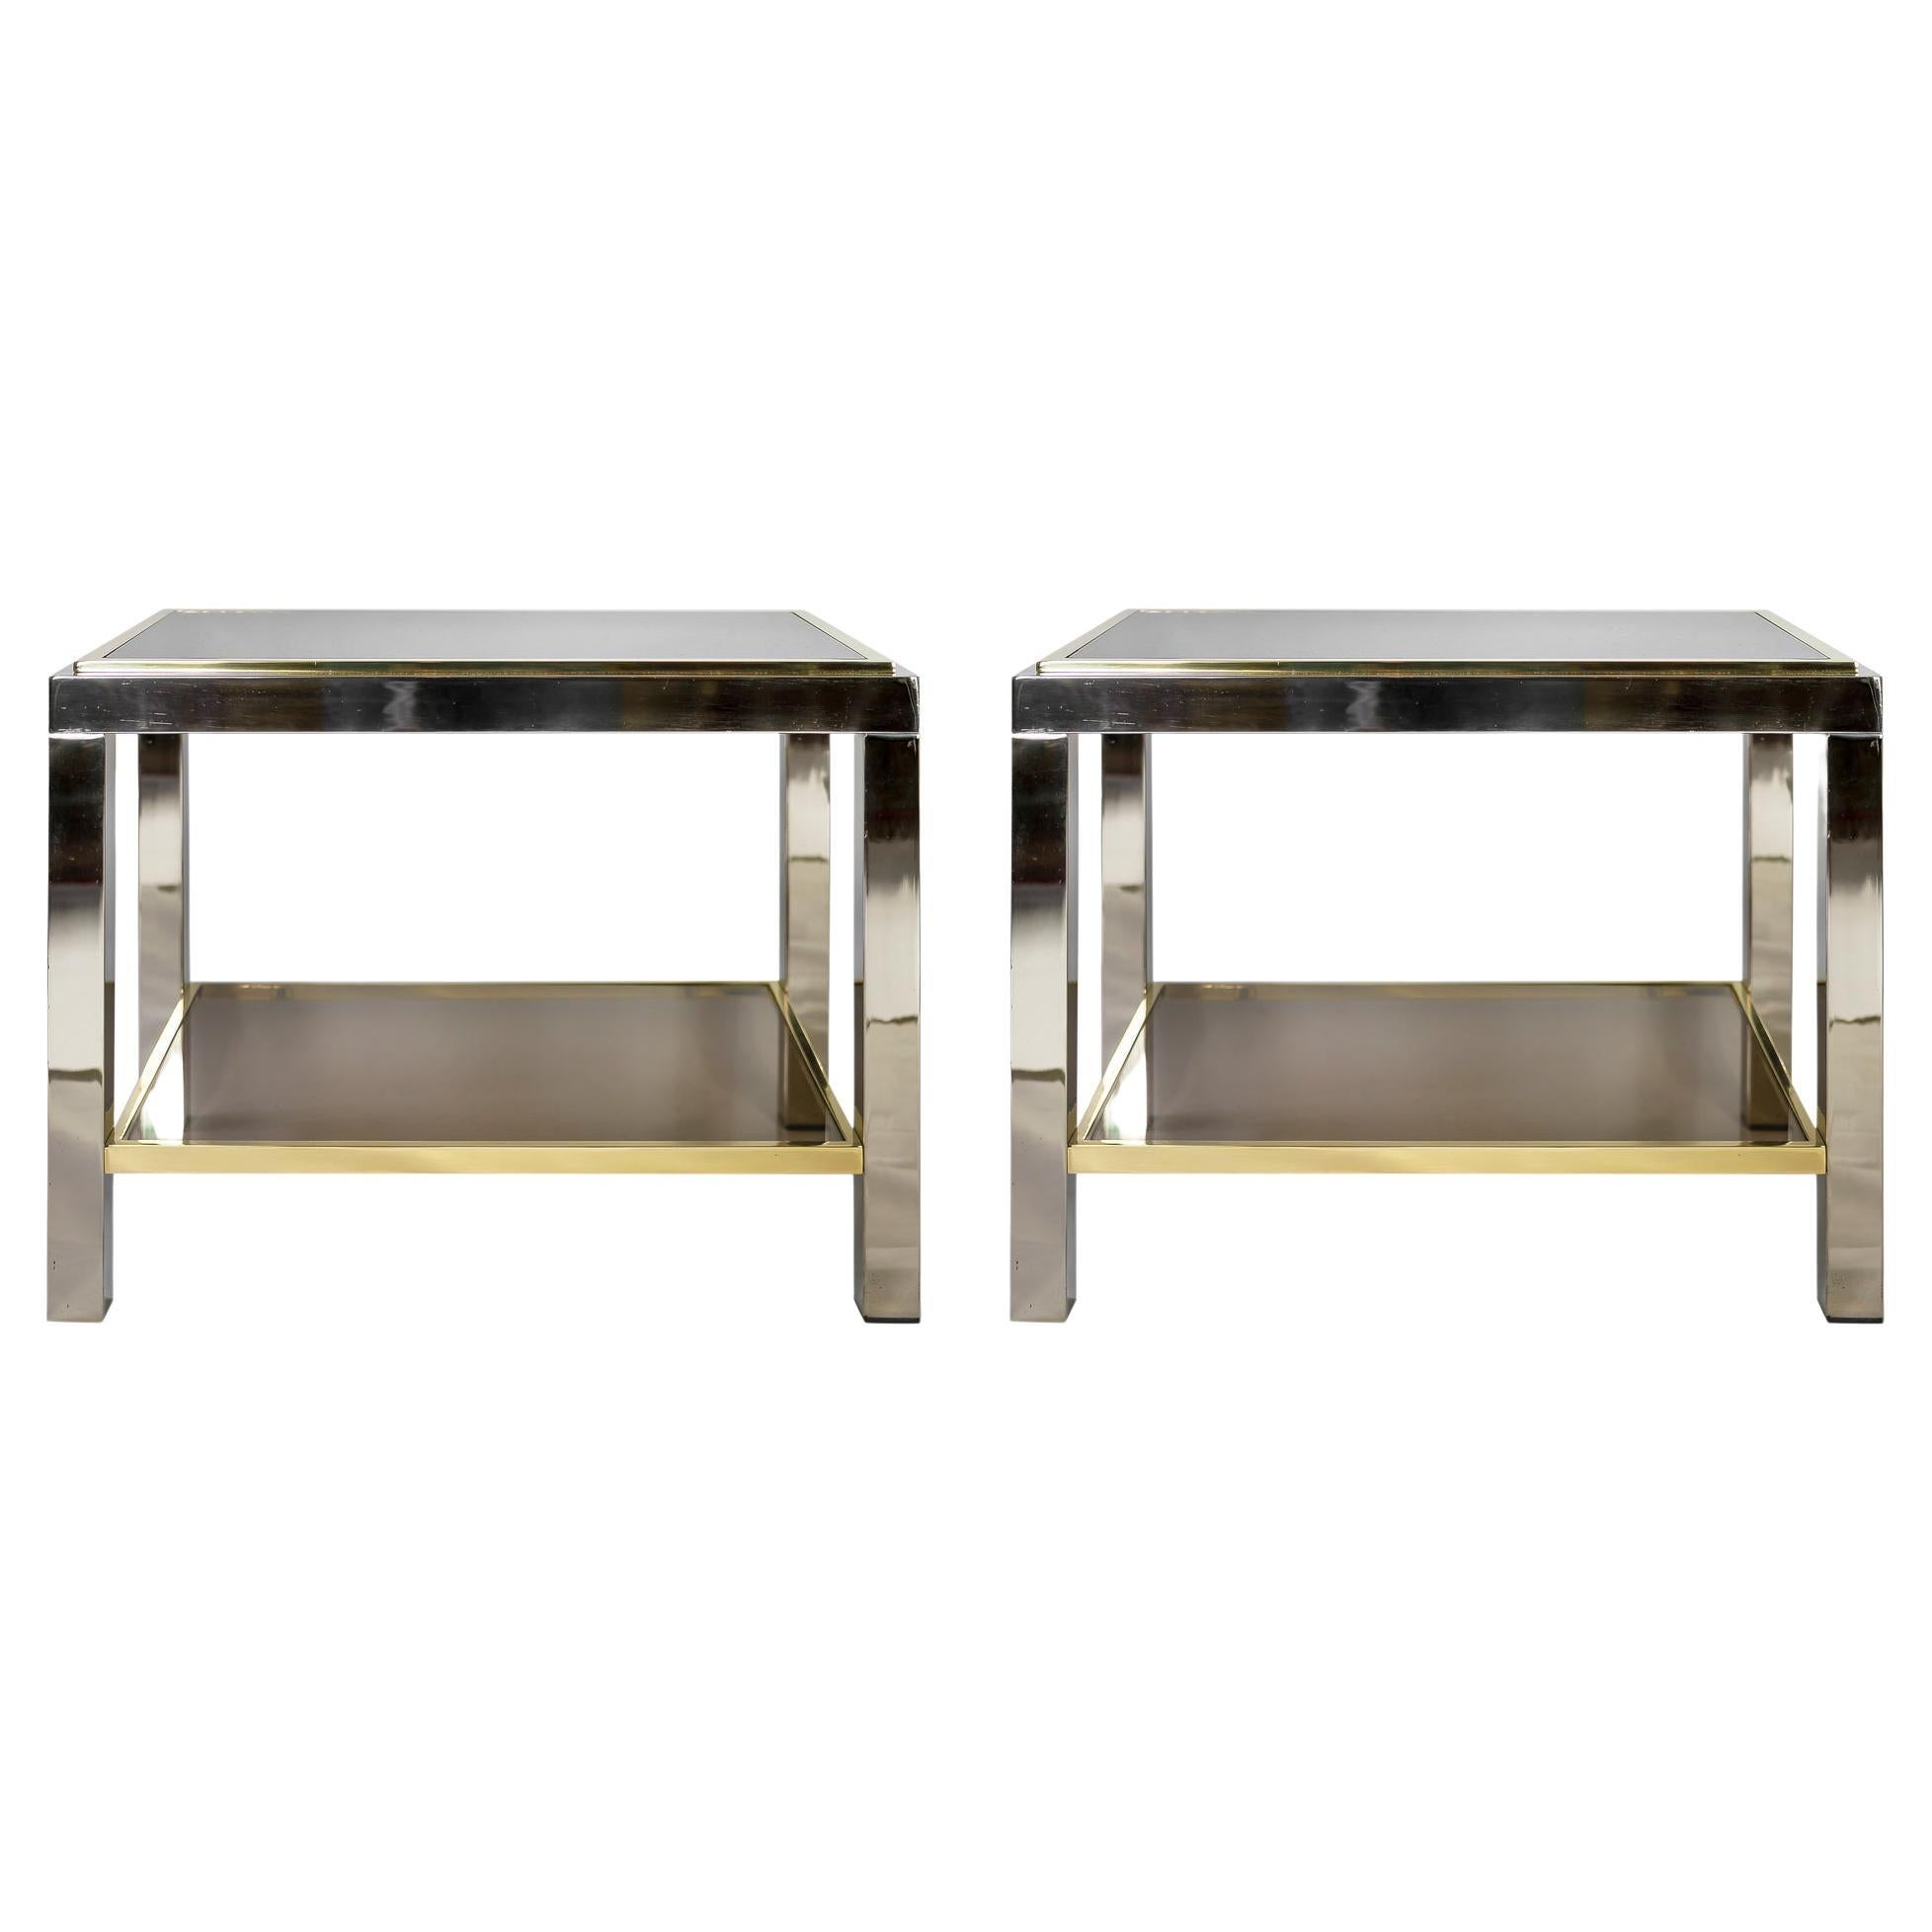 Pair of Mid-Century Brass, Chrome and Glass Top Side Tables by Willy Rizzo